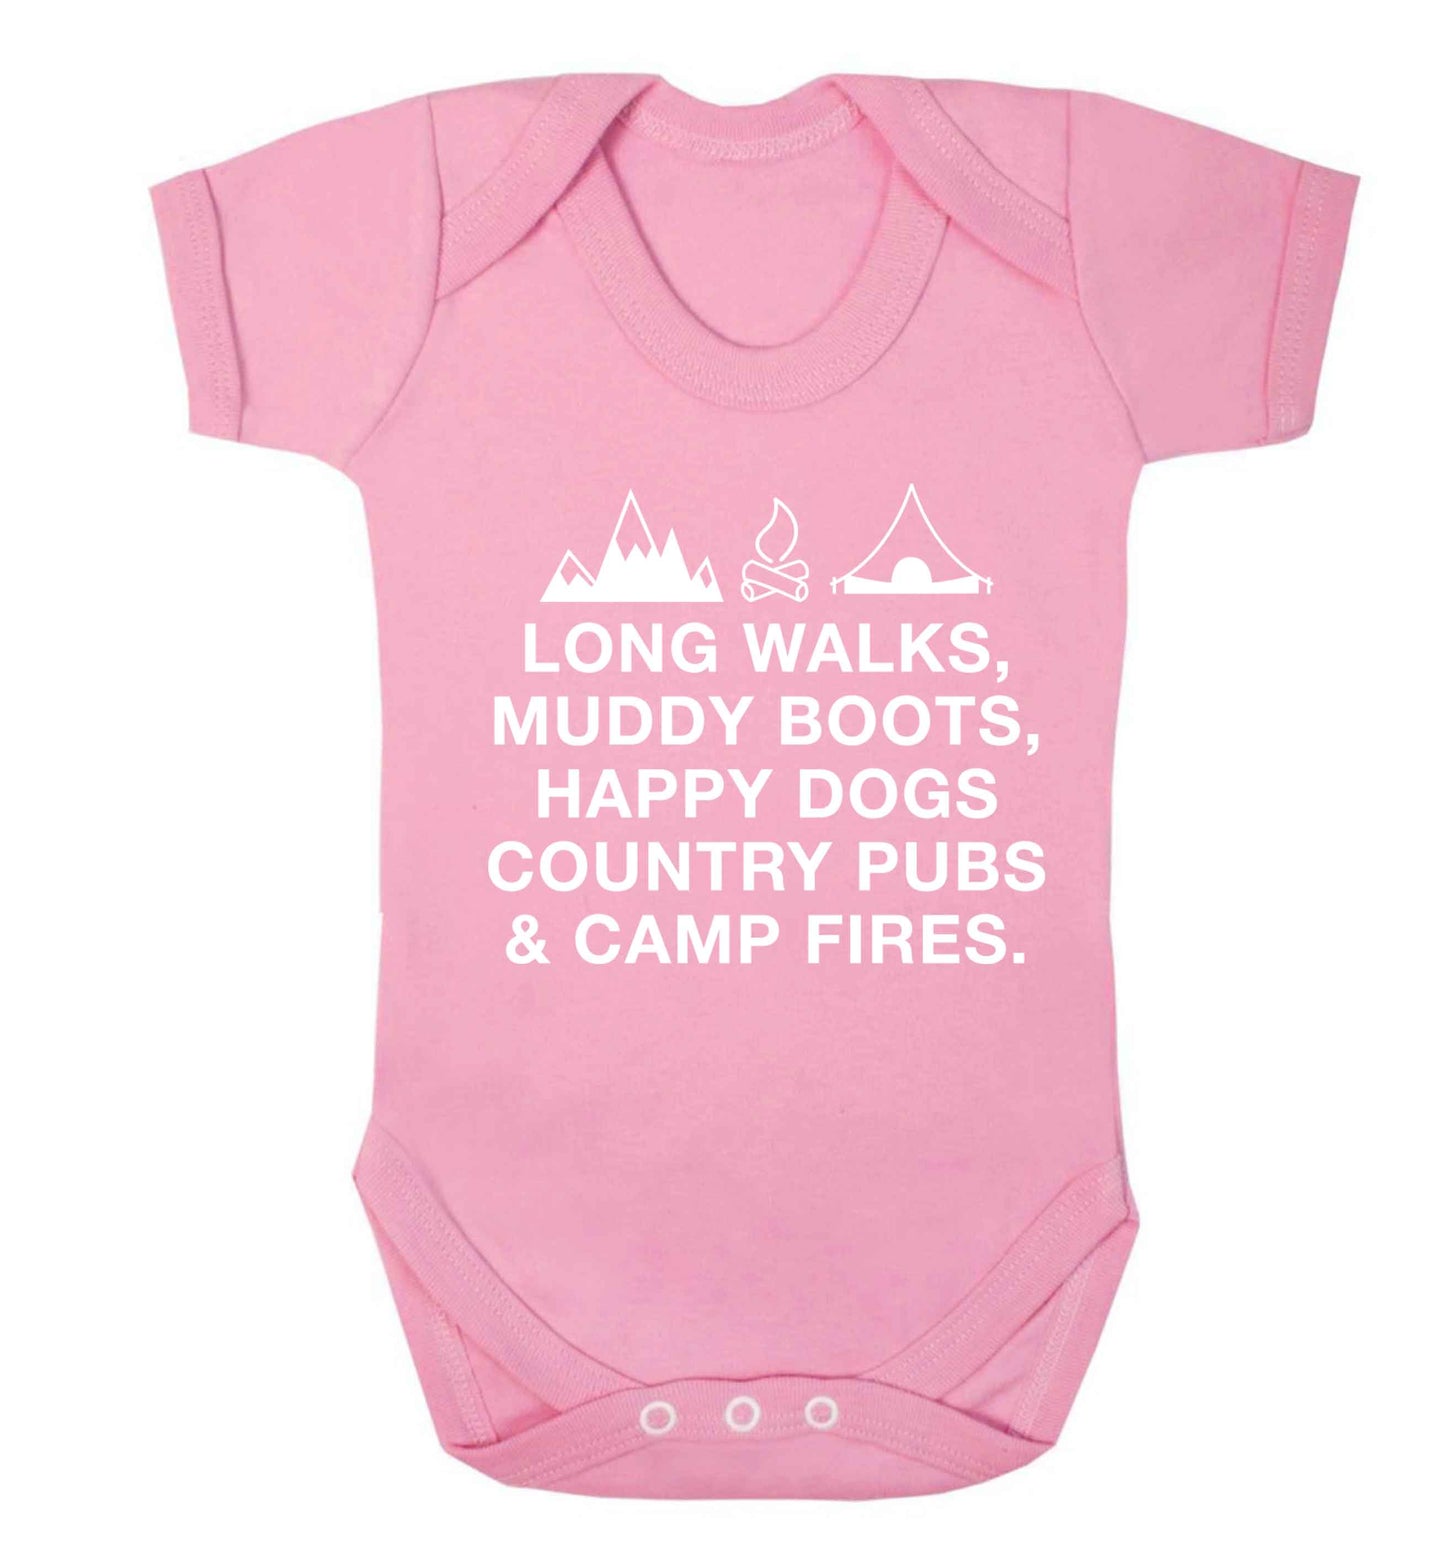 Long walks muddy boots happy dogs country pubs and camp fires Baby Vest pale pink 18-24 months